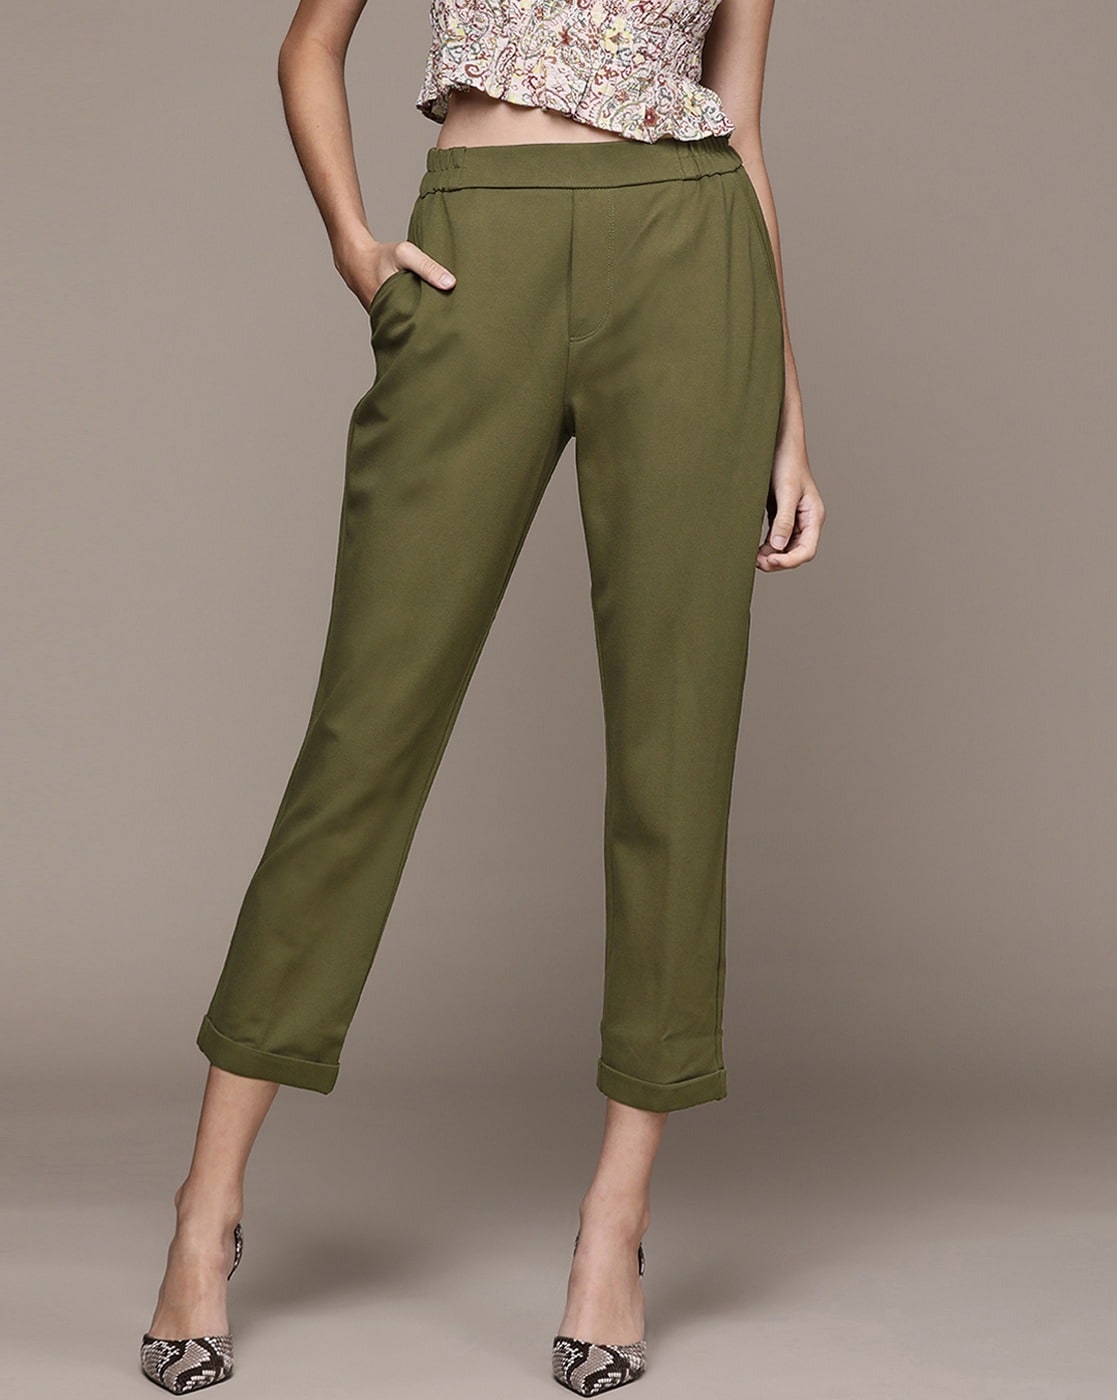 Plain Female OUSTON Ladies Olive Green Lifestyle Athleisure Track Pant,  Waist Size: 30.0 at best price in Bengaluru